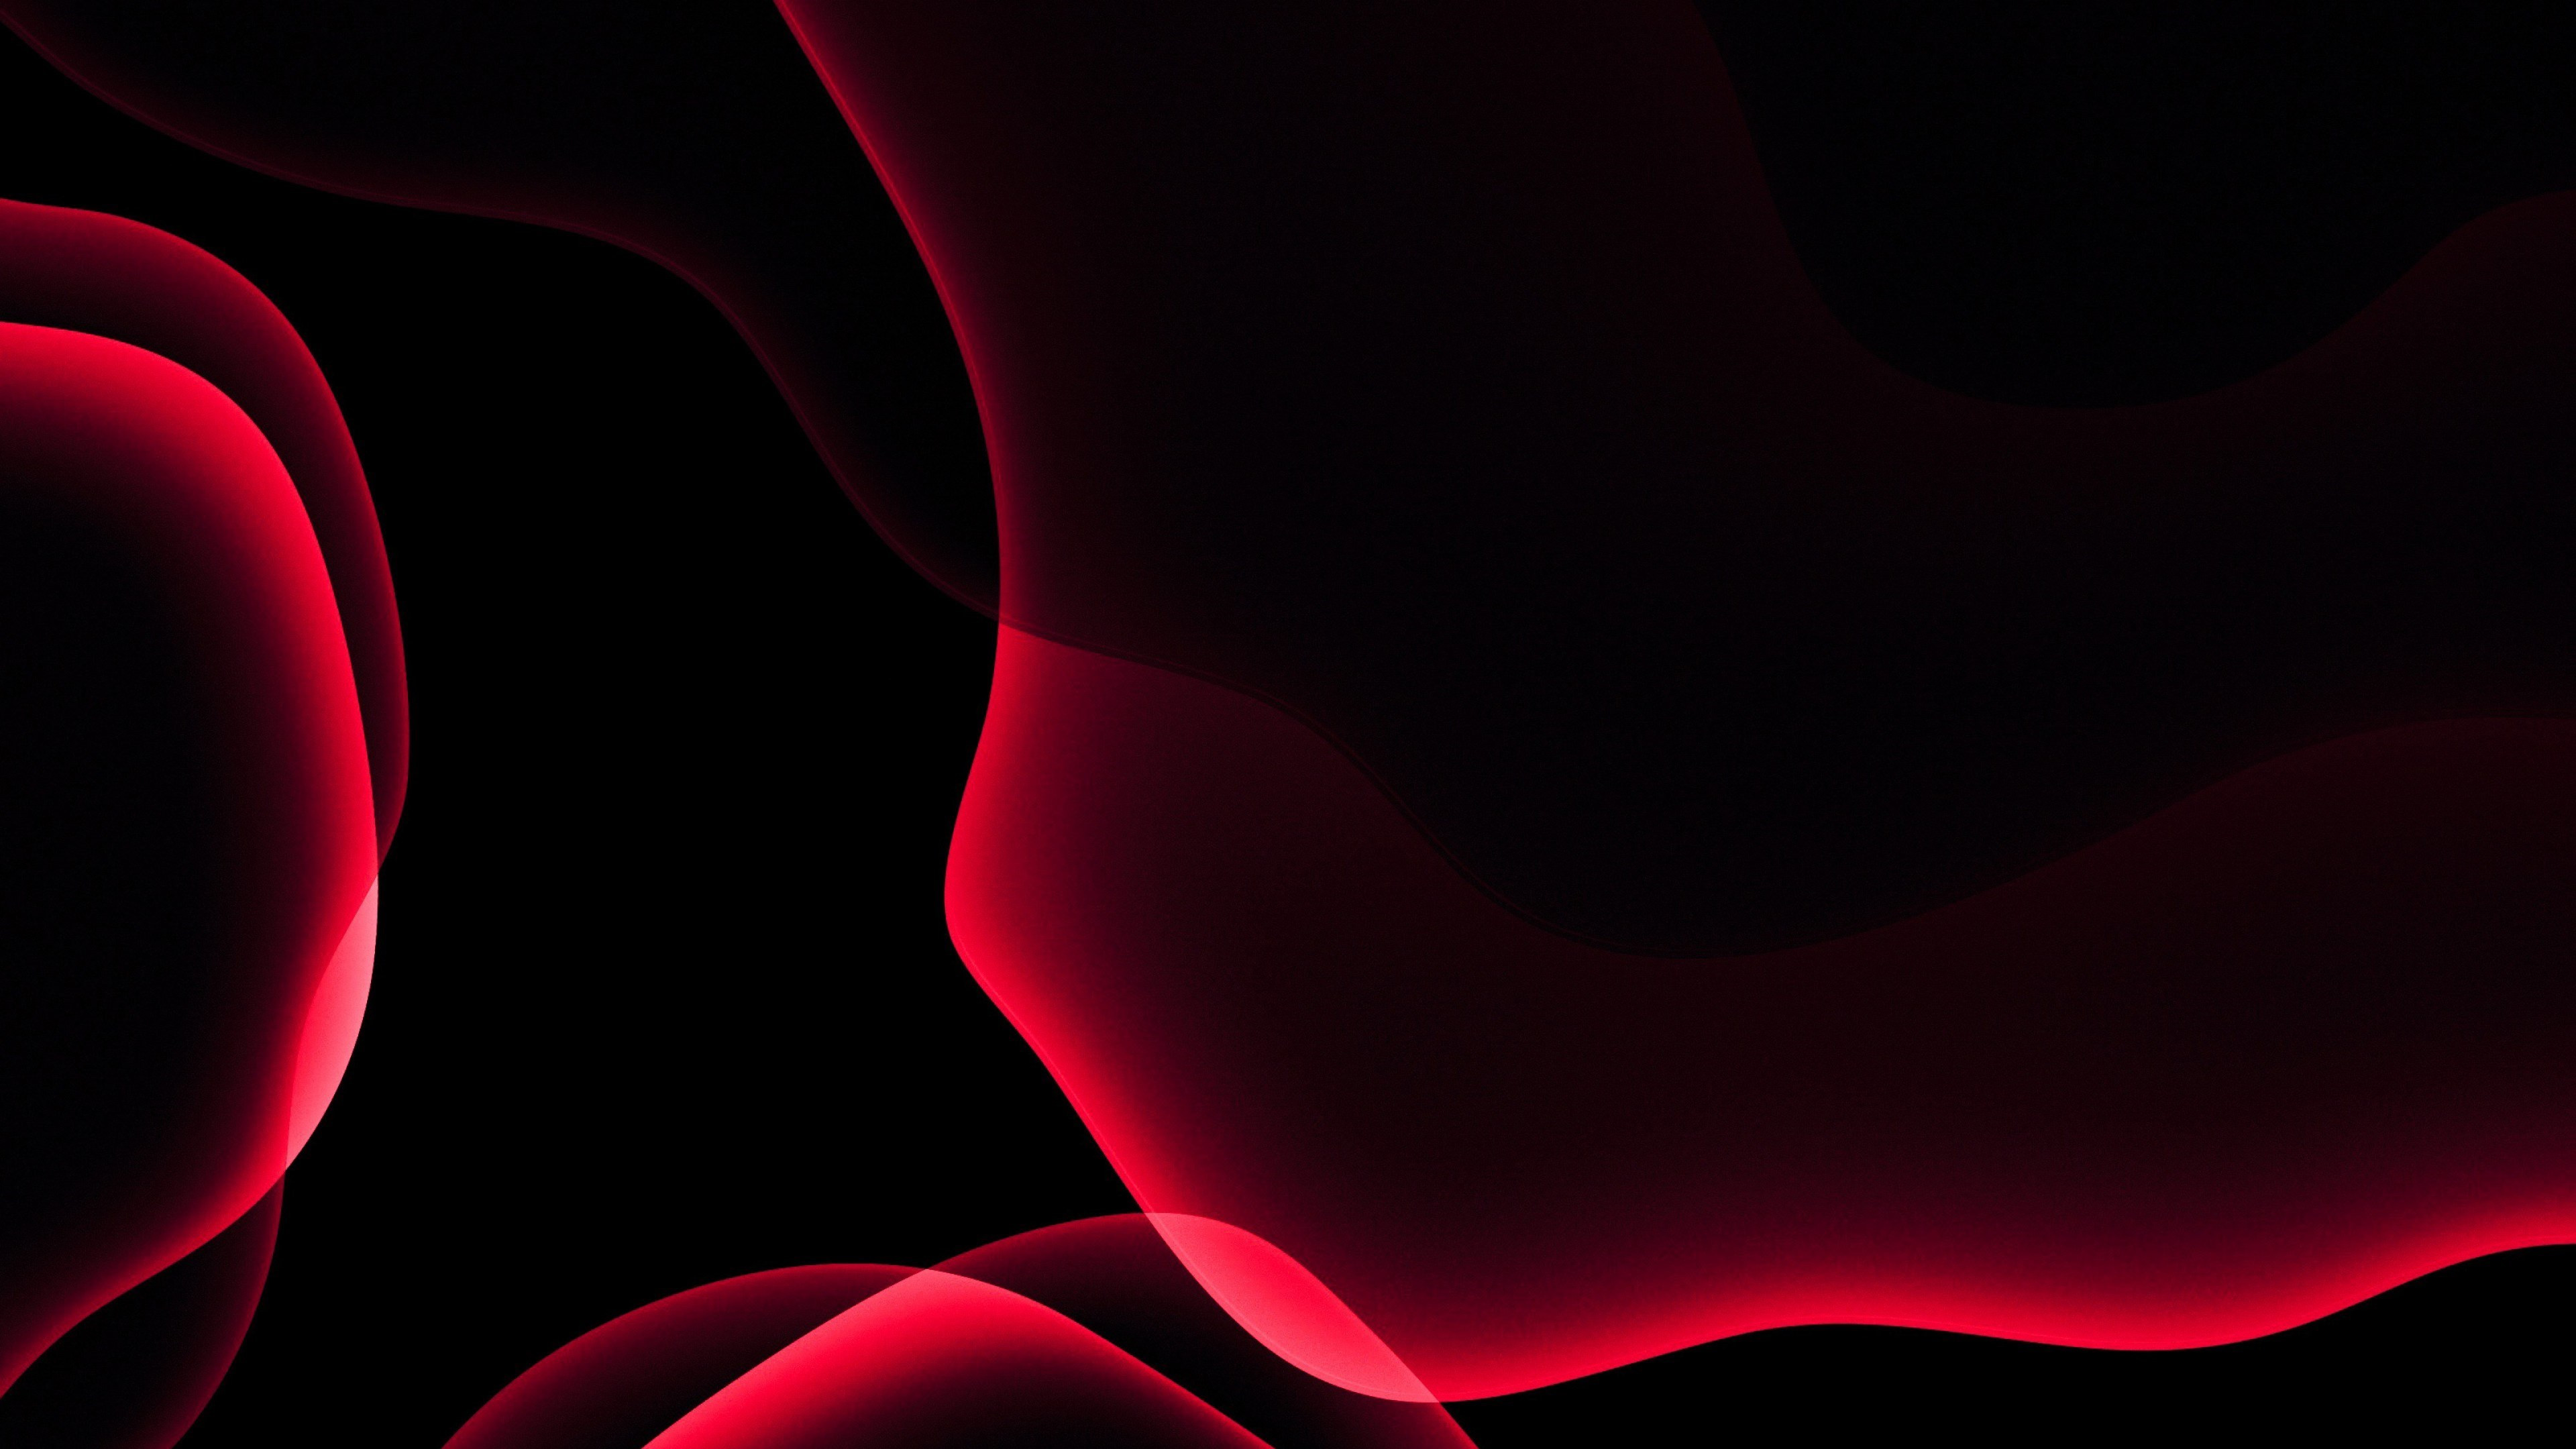 Download wallpaper iOS 13 red abstract 3840x2160